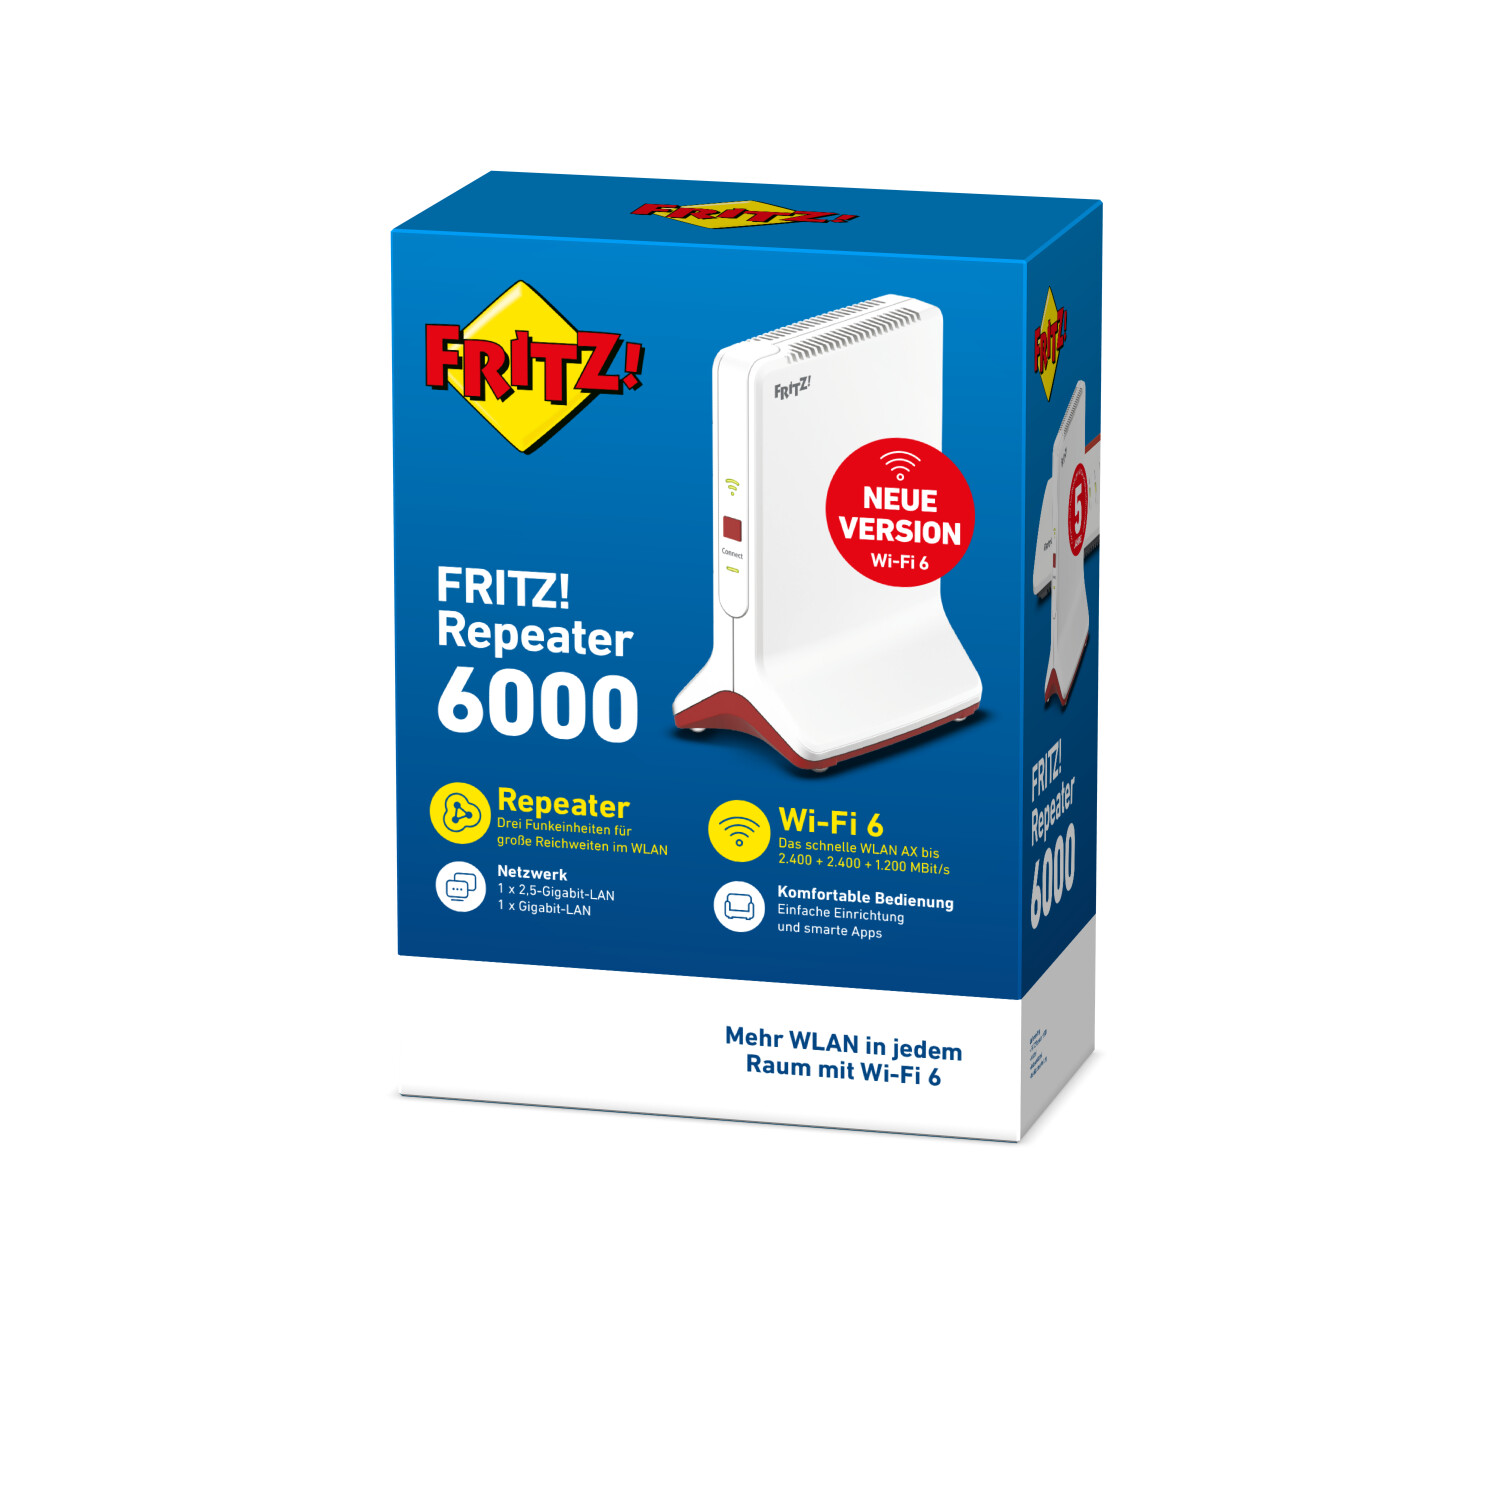 Buy AVM FRITZ!Repeater 6000 from £265.49 (Today) – Best Deals on